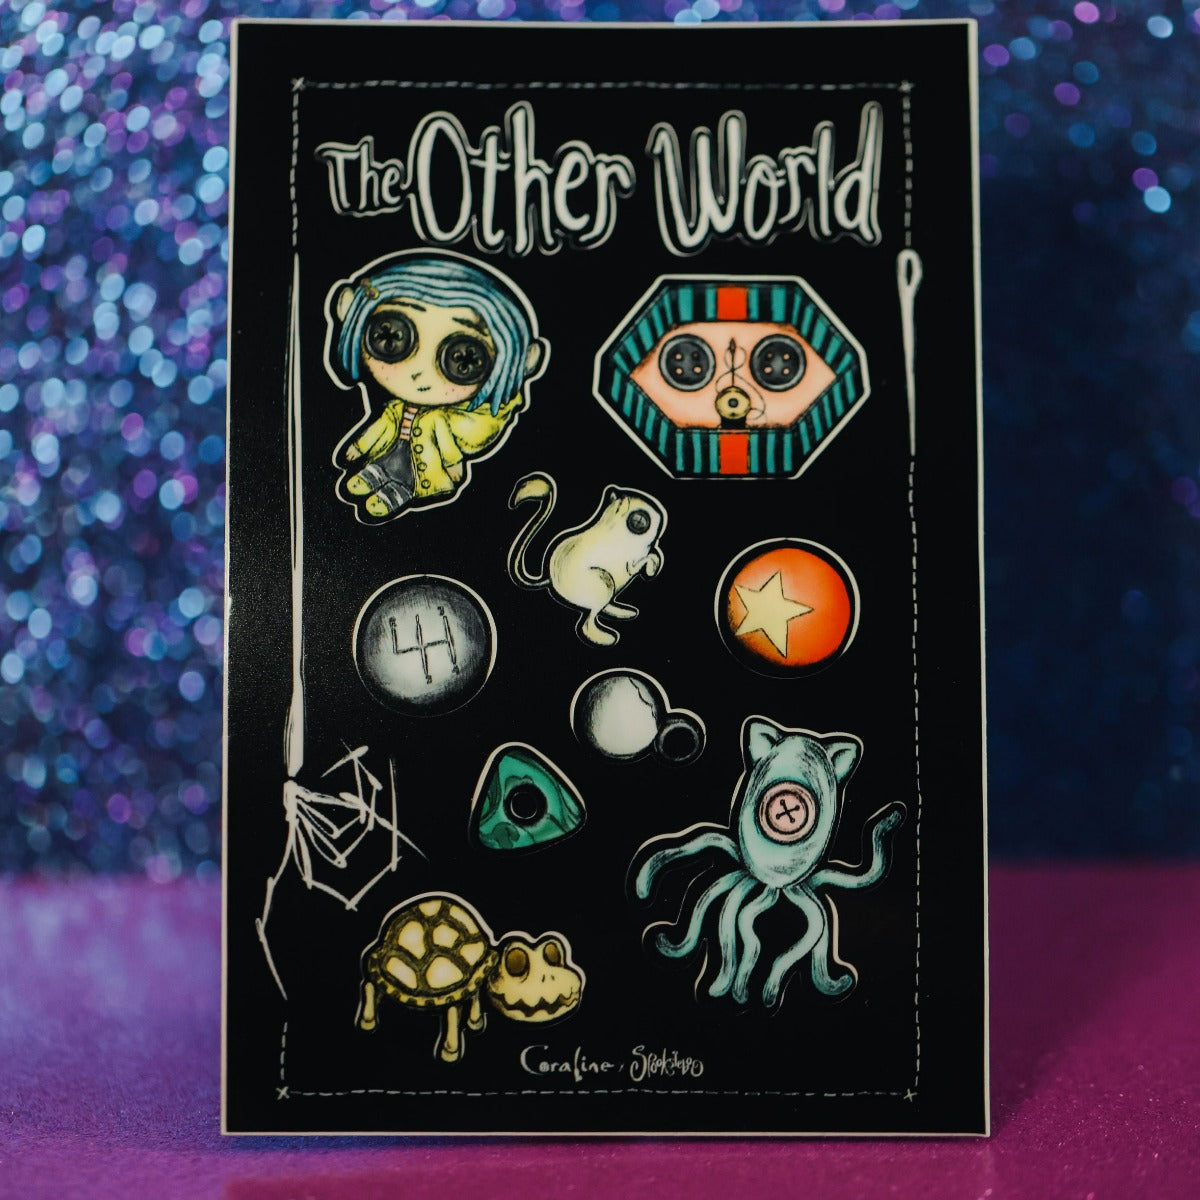 Coraline: The Other World Objects - Sticker Sheet